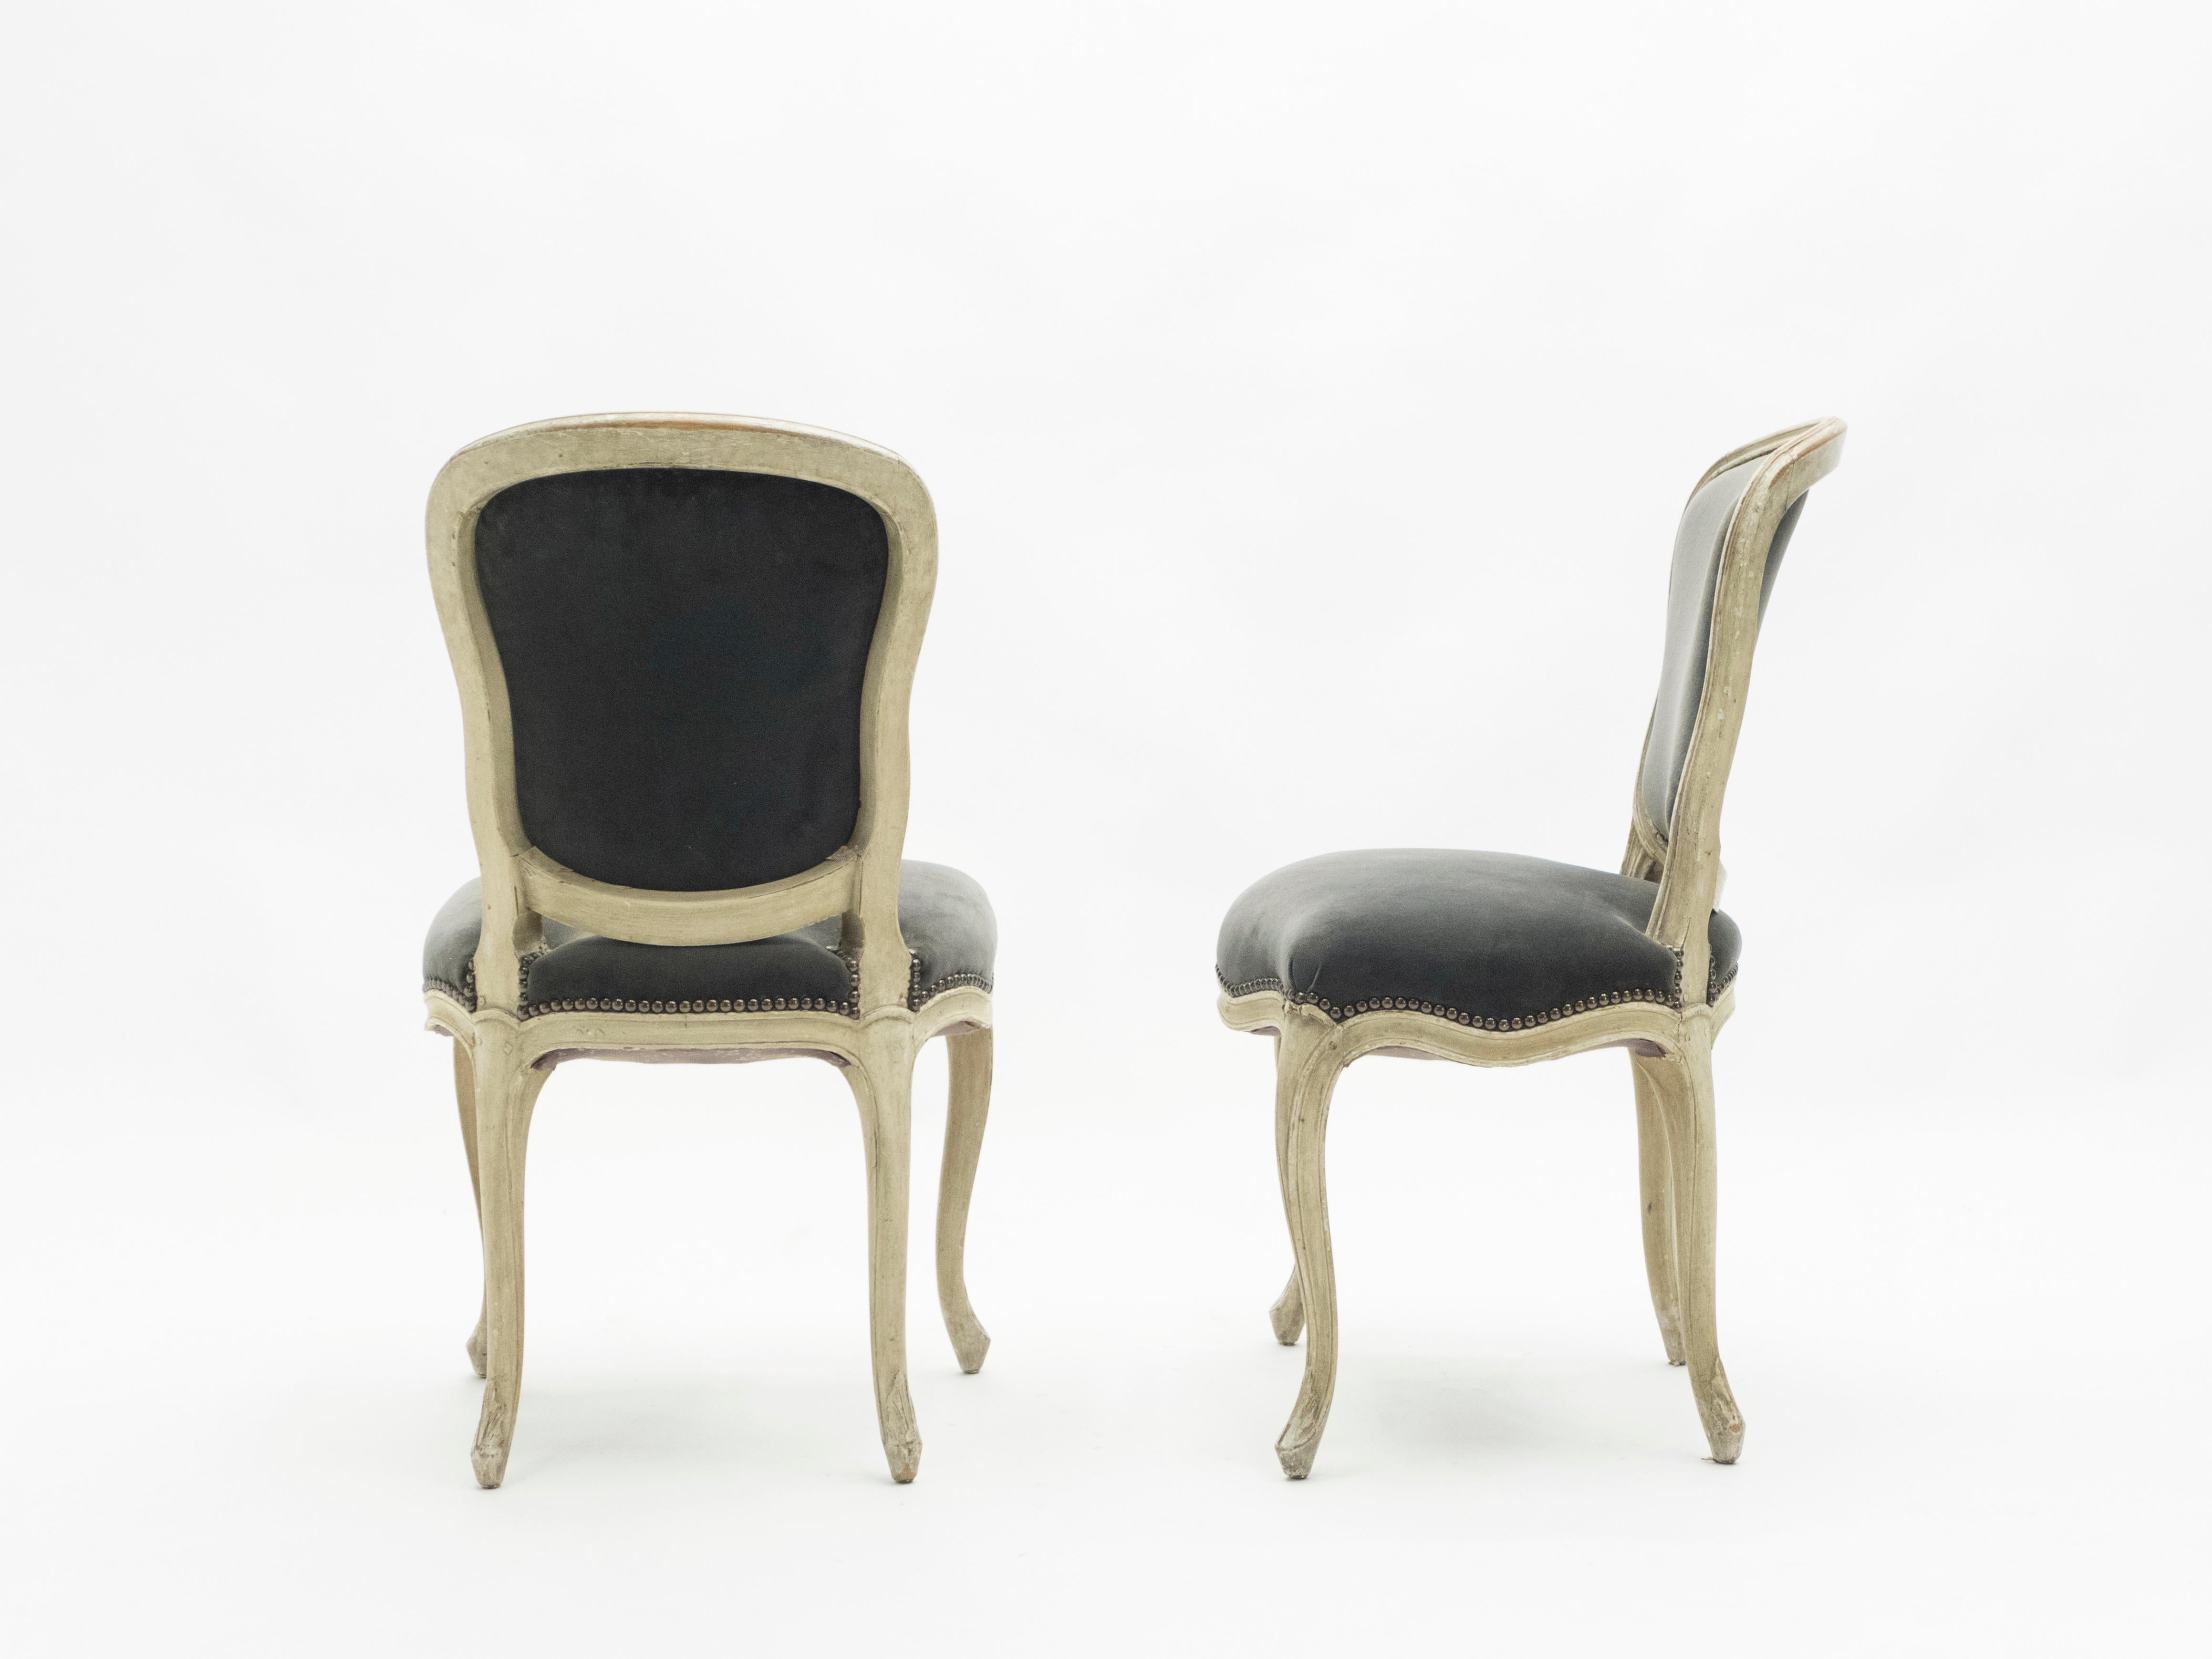 Rare Pair of Stamped Maison Jansen Louis XV Neoclassical Chairs, 1940s For Sale 1